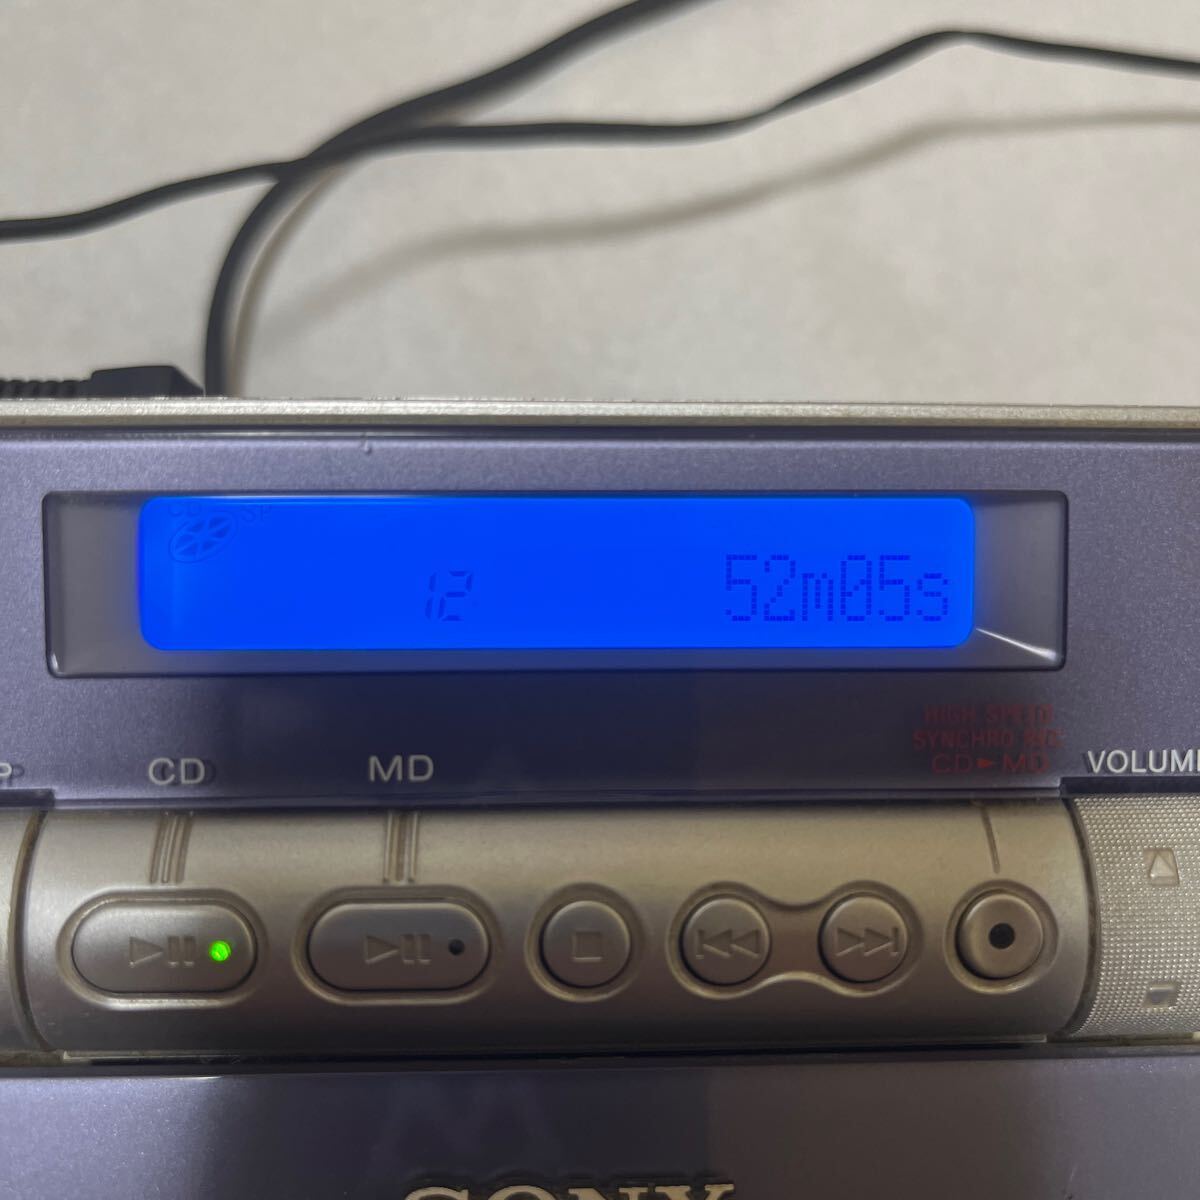 SONY CD MD player LAM-1